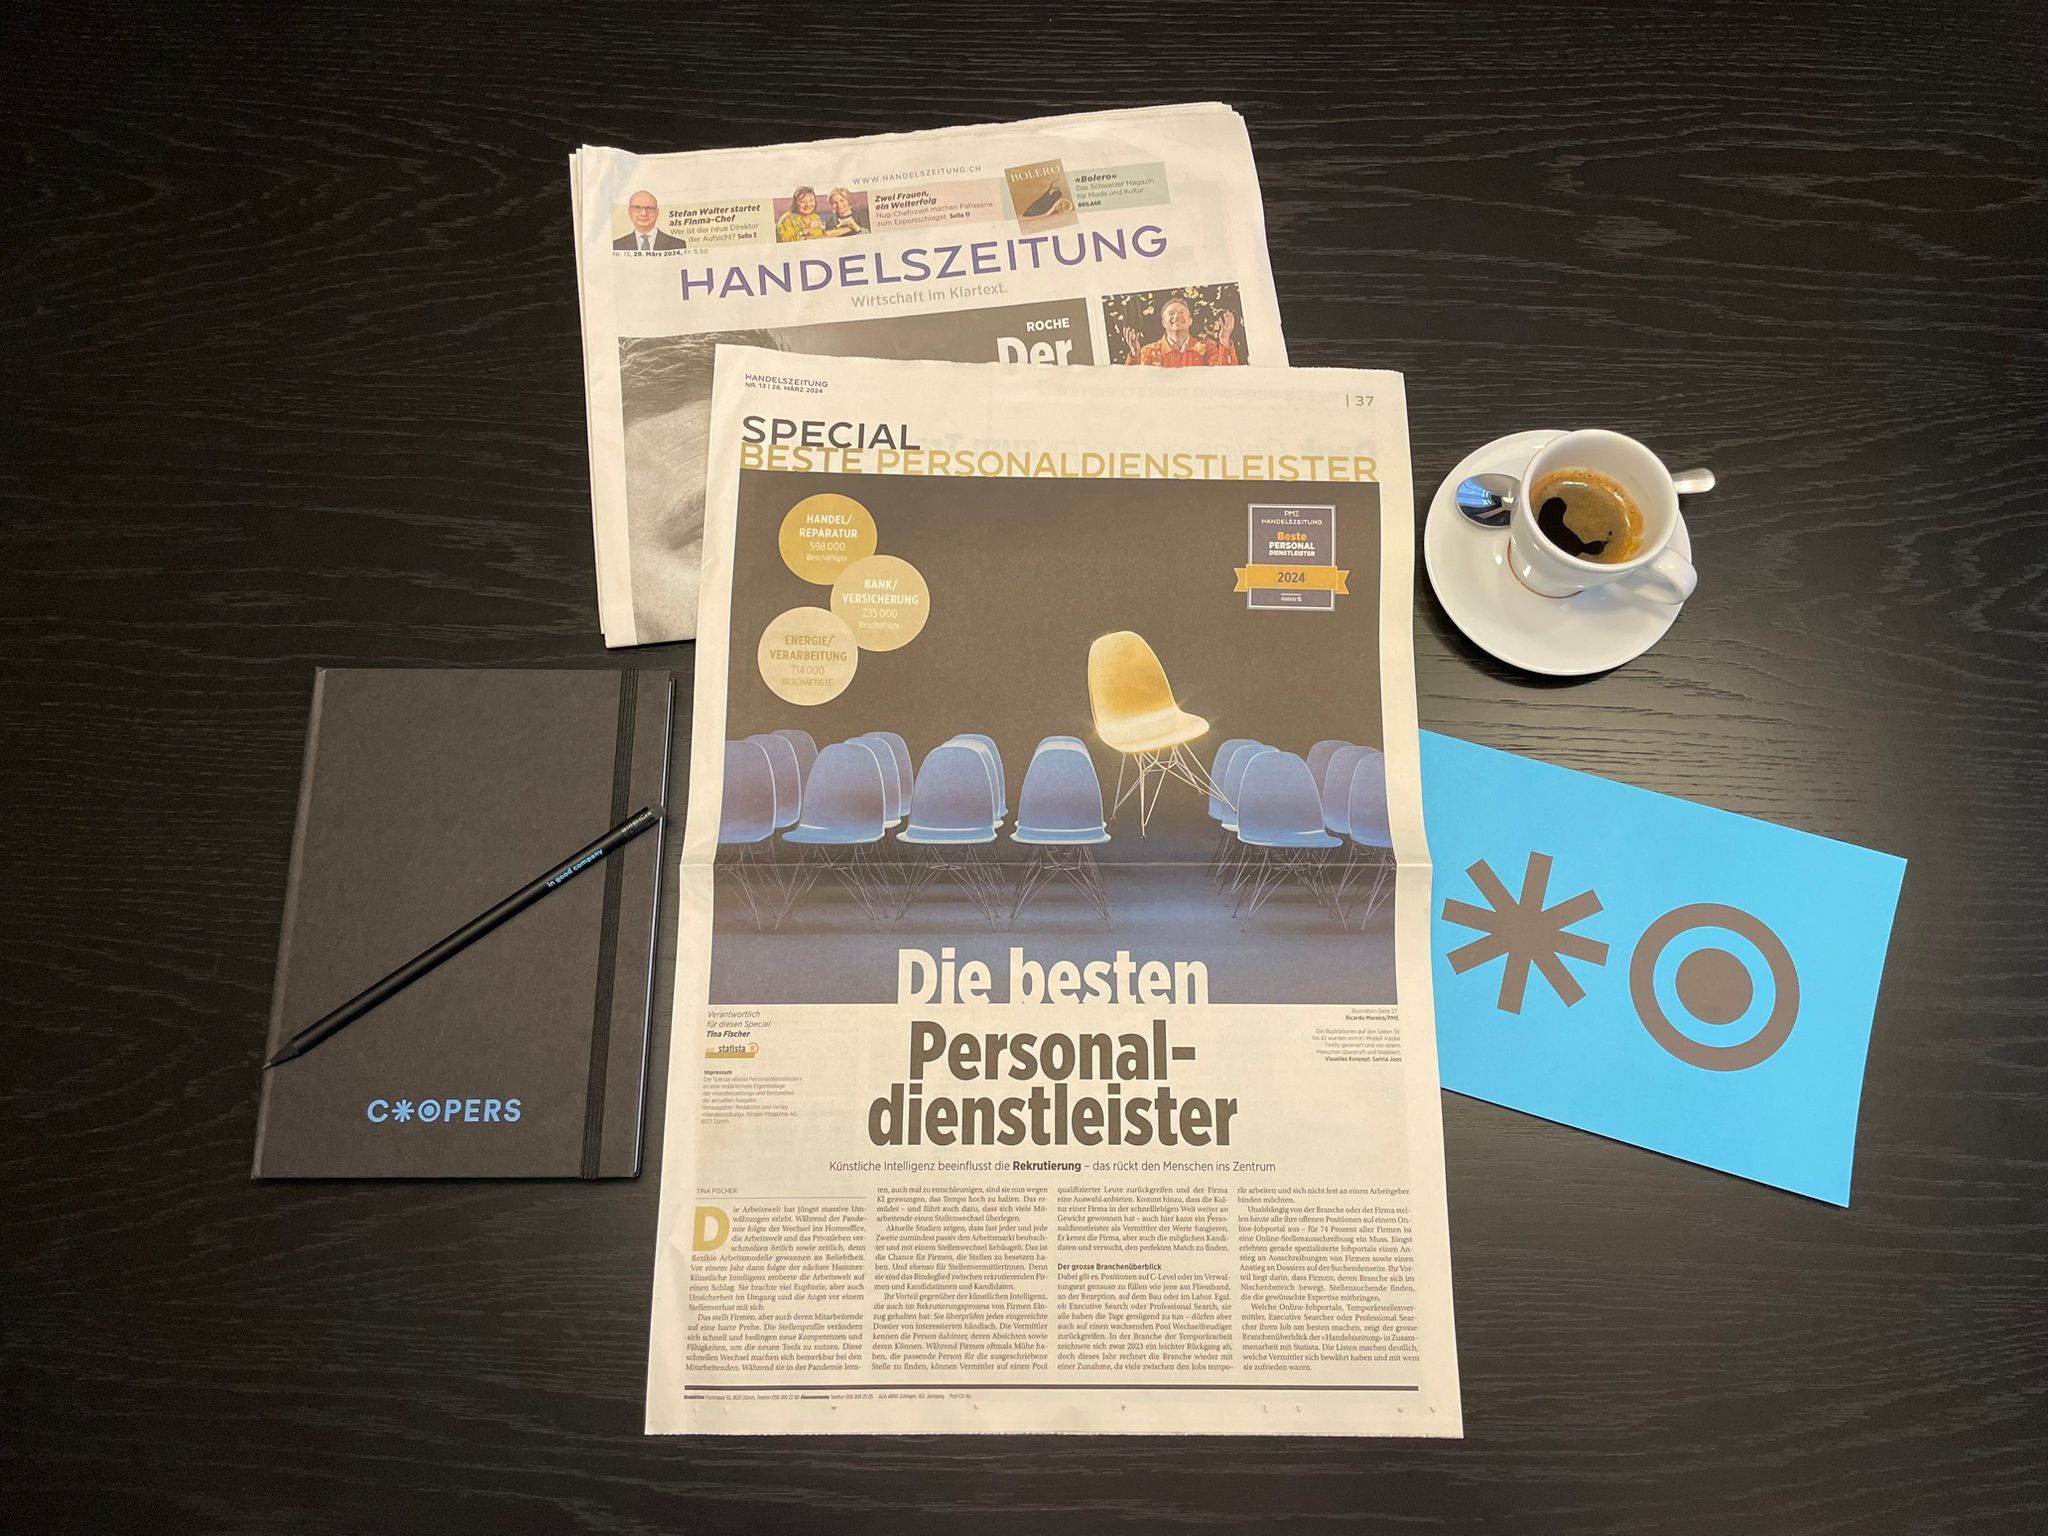 Handelszeitung on Desk with Coffee and Coopers Gadgets